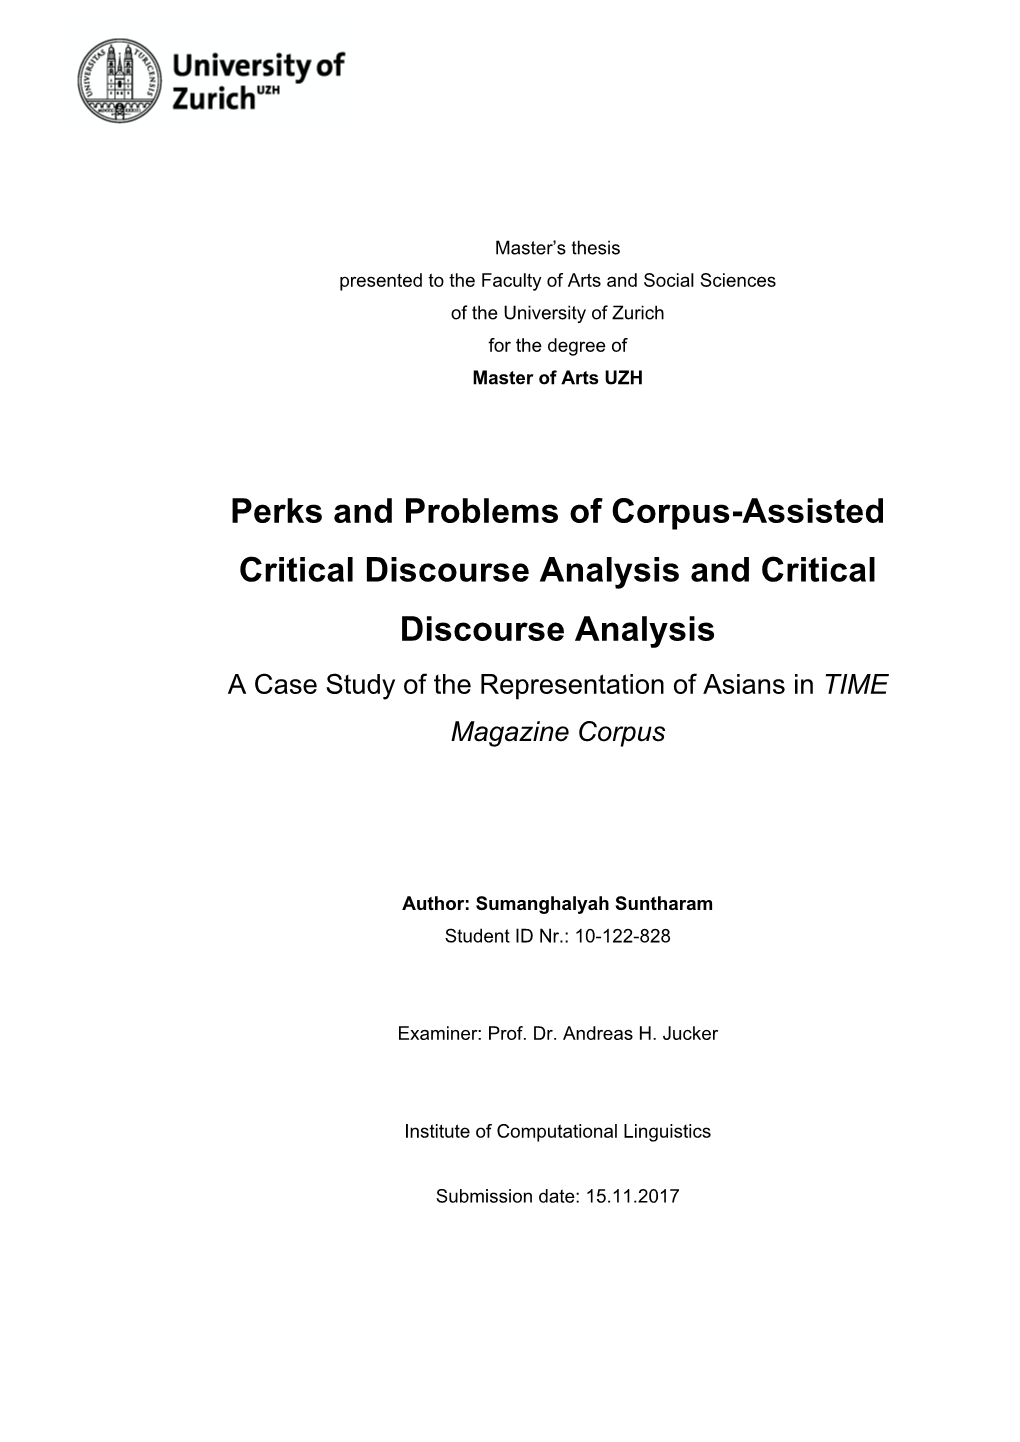 Perks and Problems of Corpus-Assisted Critical Discourse Analysis and Critical Discourse Analysis